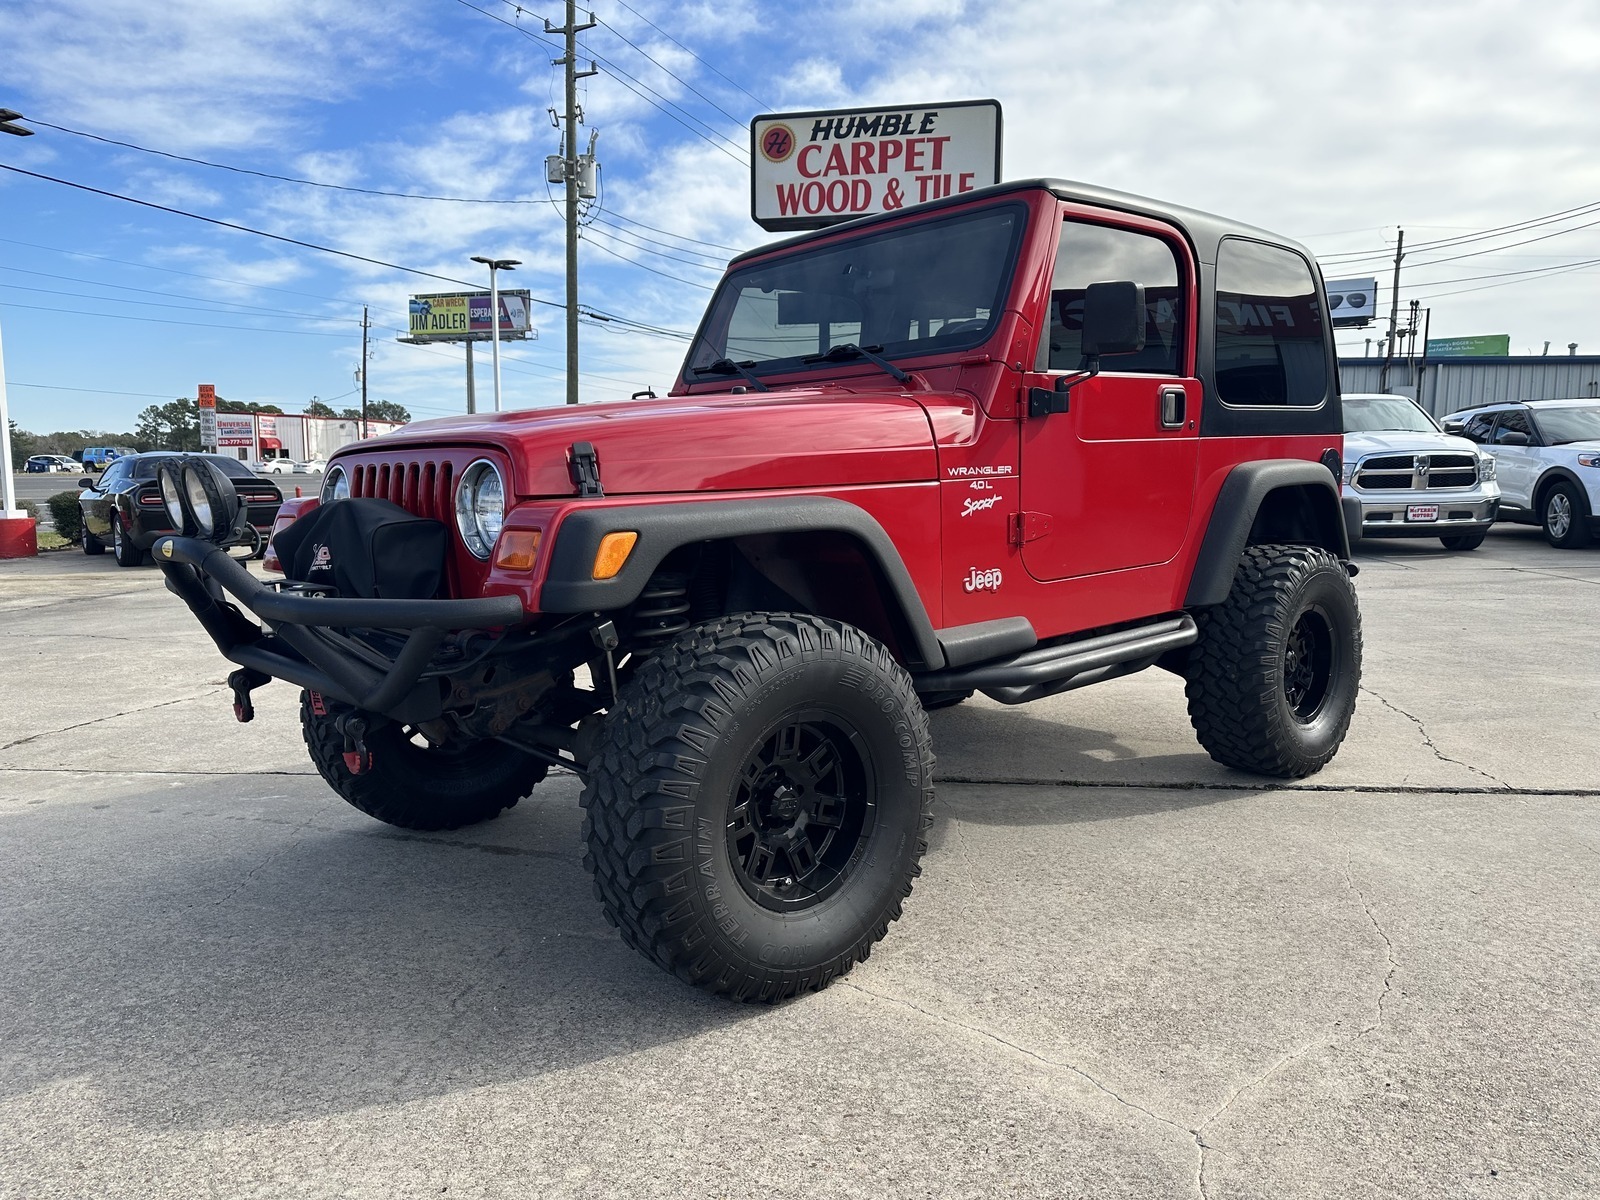 Used 2000 Jeep Wrangler for Sale Right Now - Autotrader